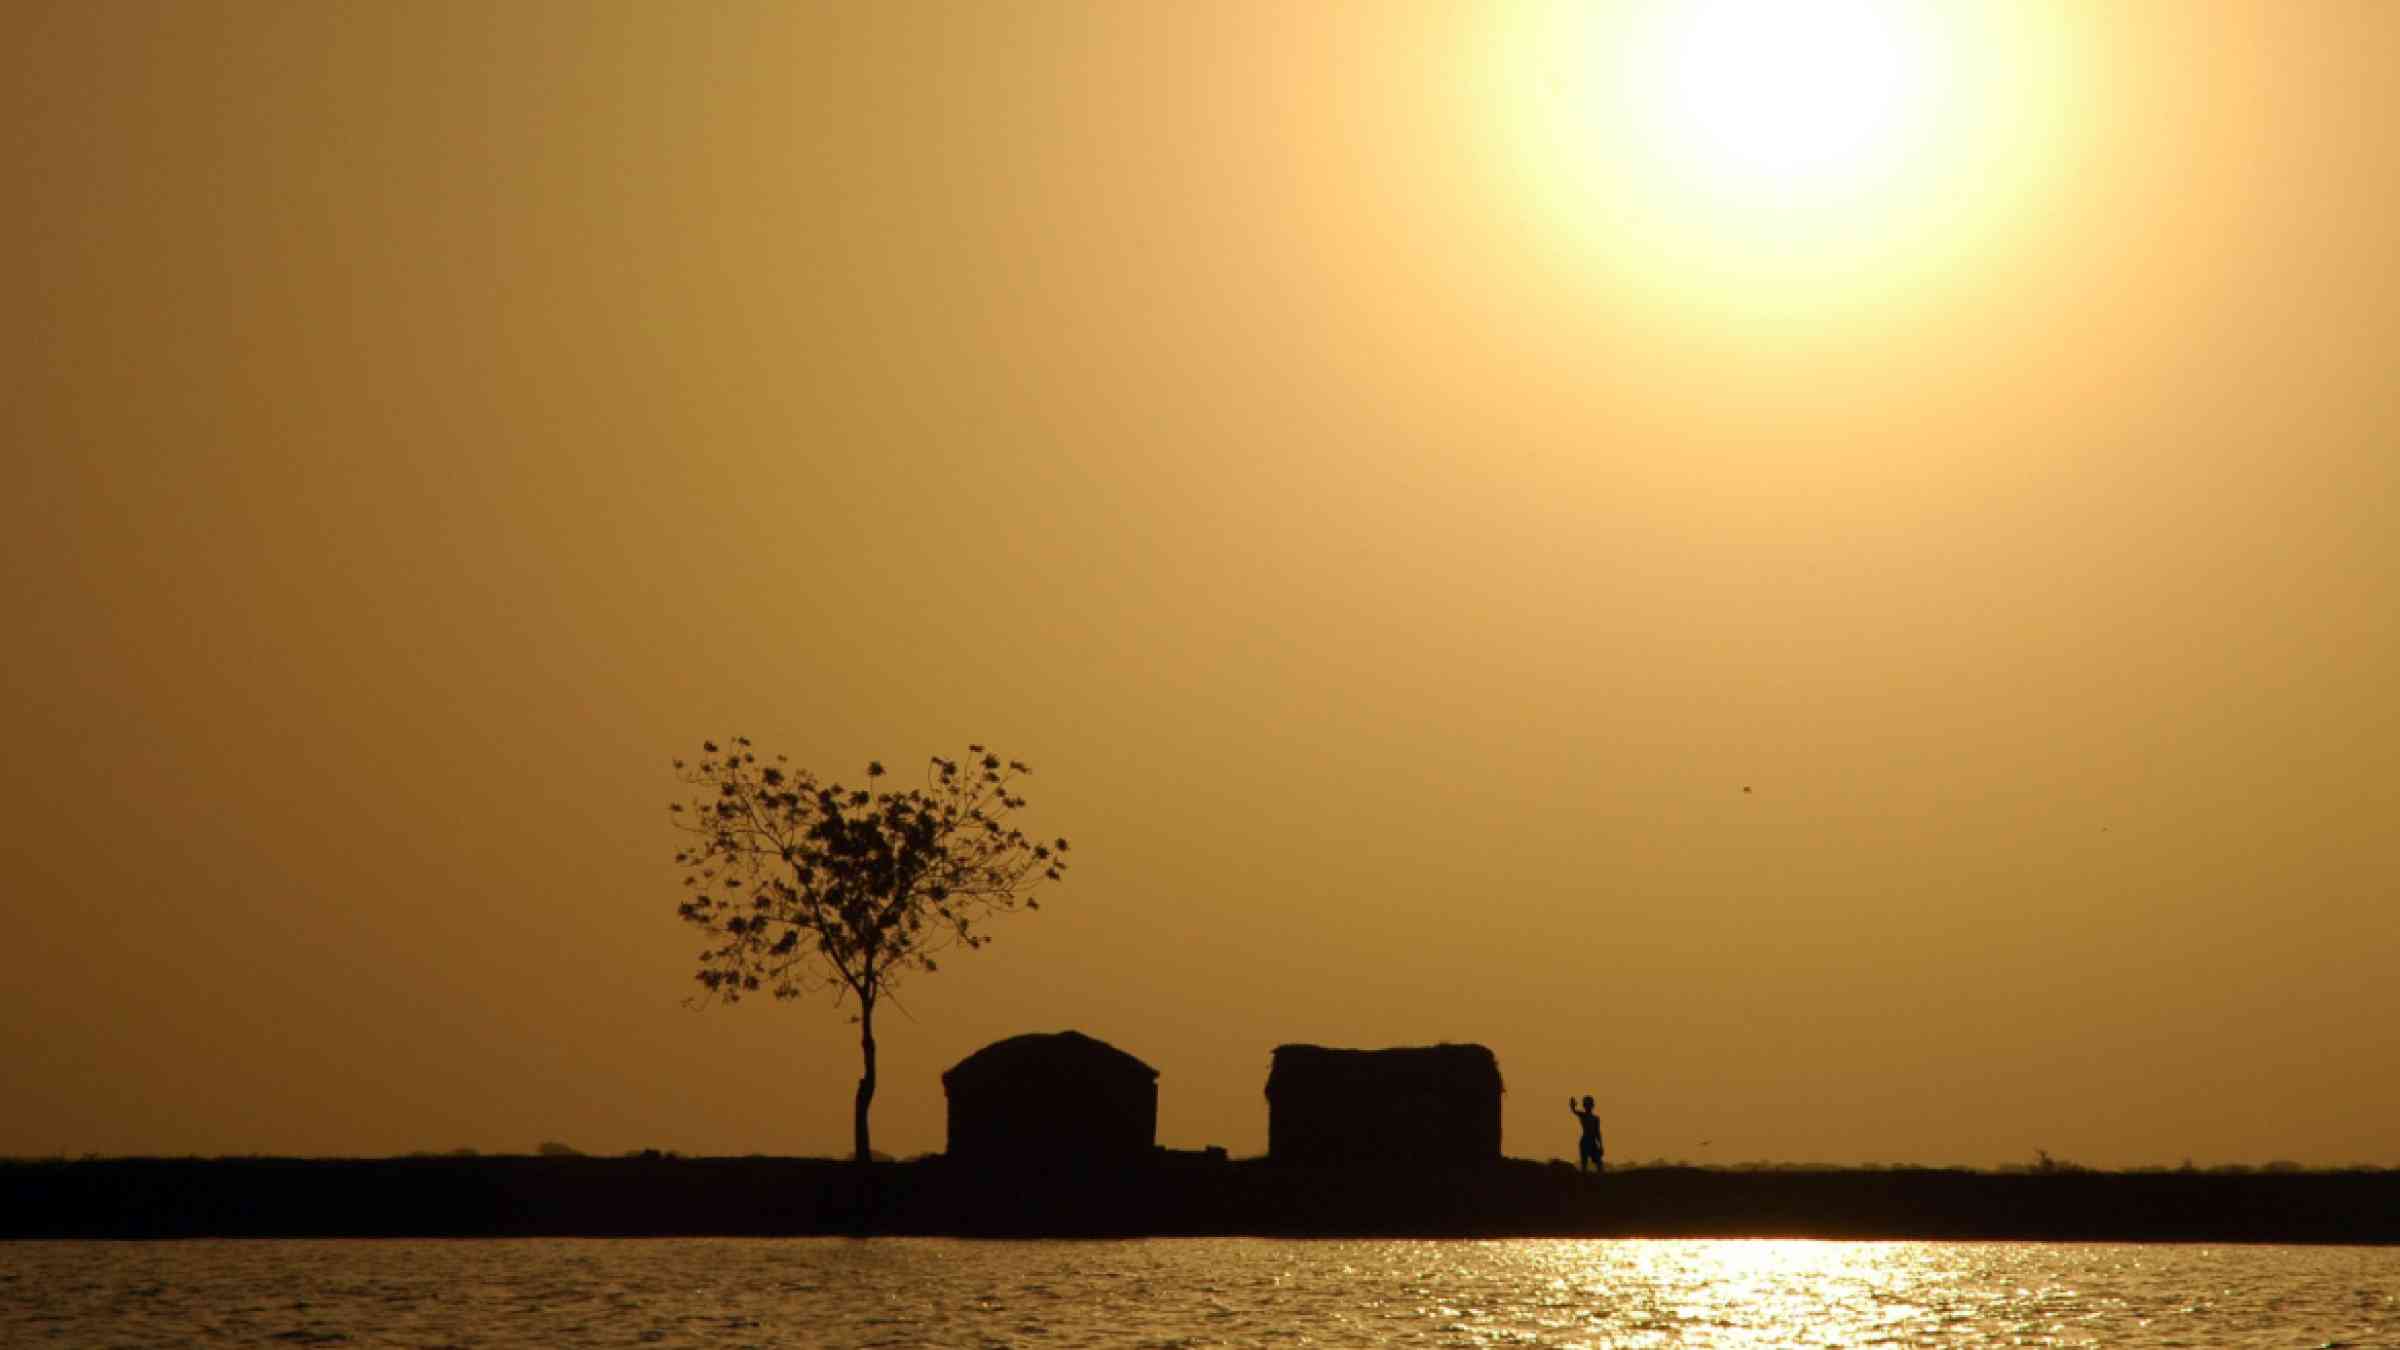 Sun over traditional West African homes along the Niger river shore